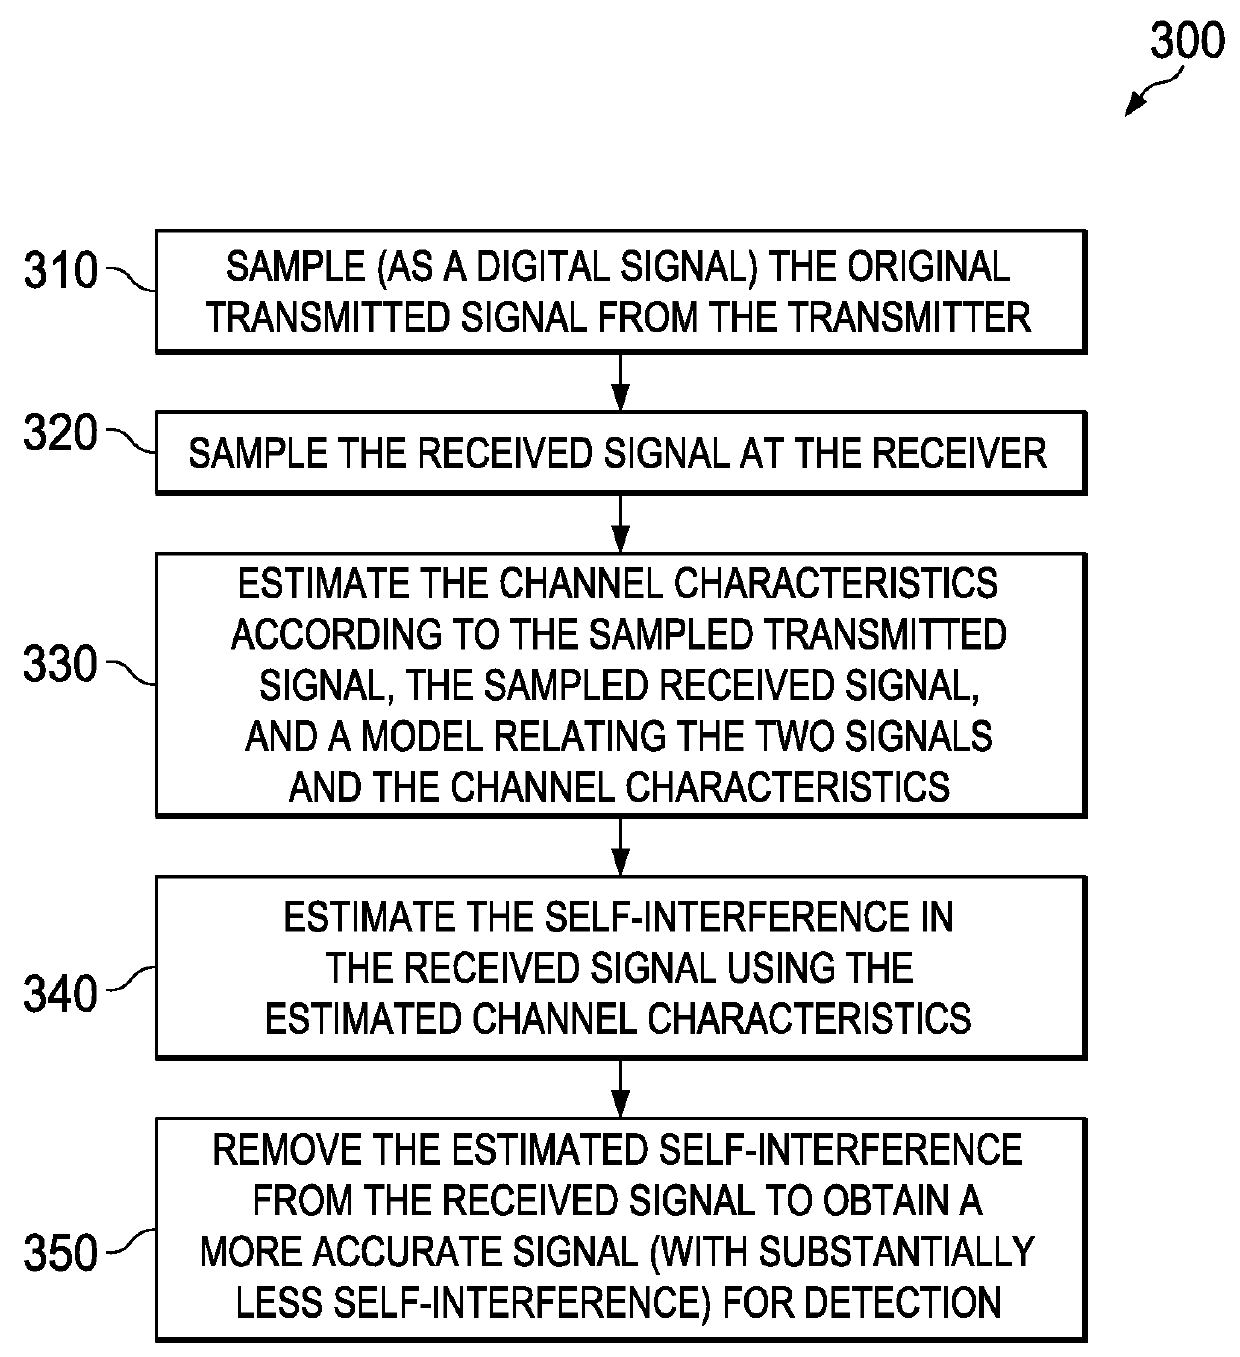 System and Method for Digital Cancellation of Self-Interference in Full-Duplex Communications